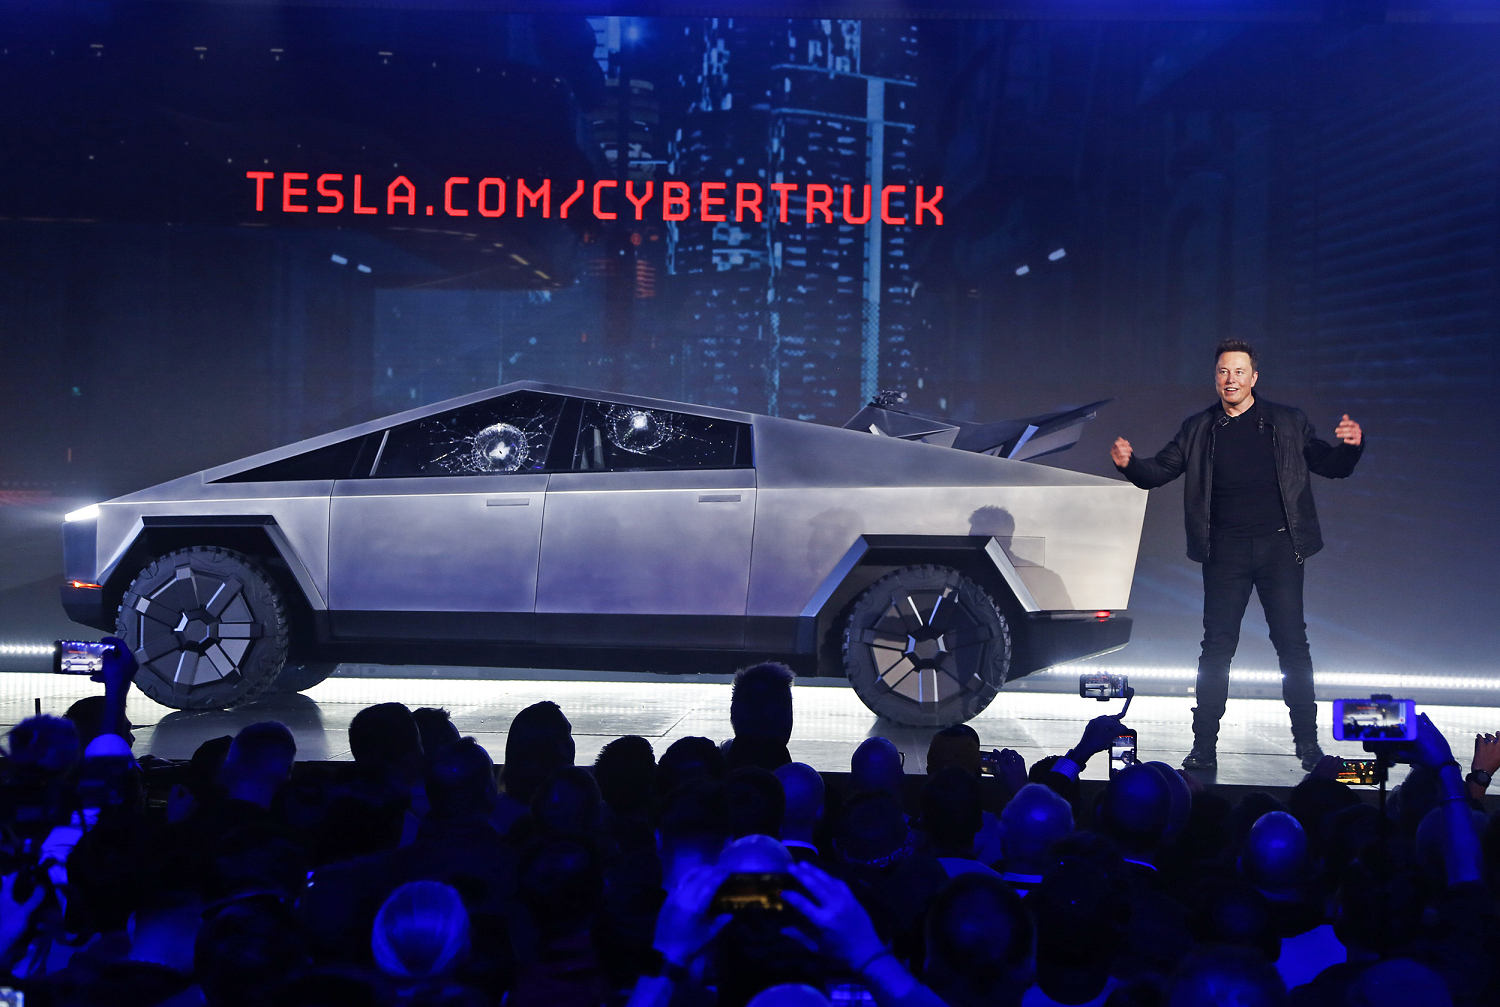 Tesla’s Cybertruck dreams just crashed into reality